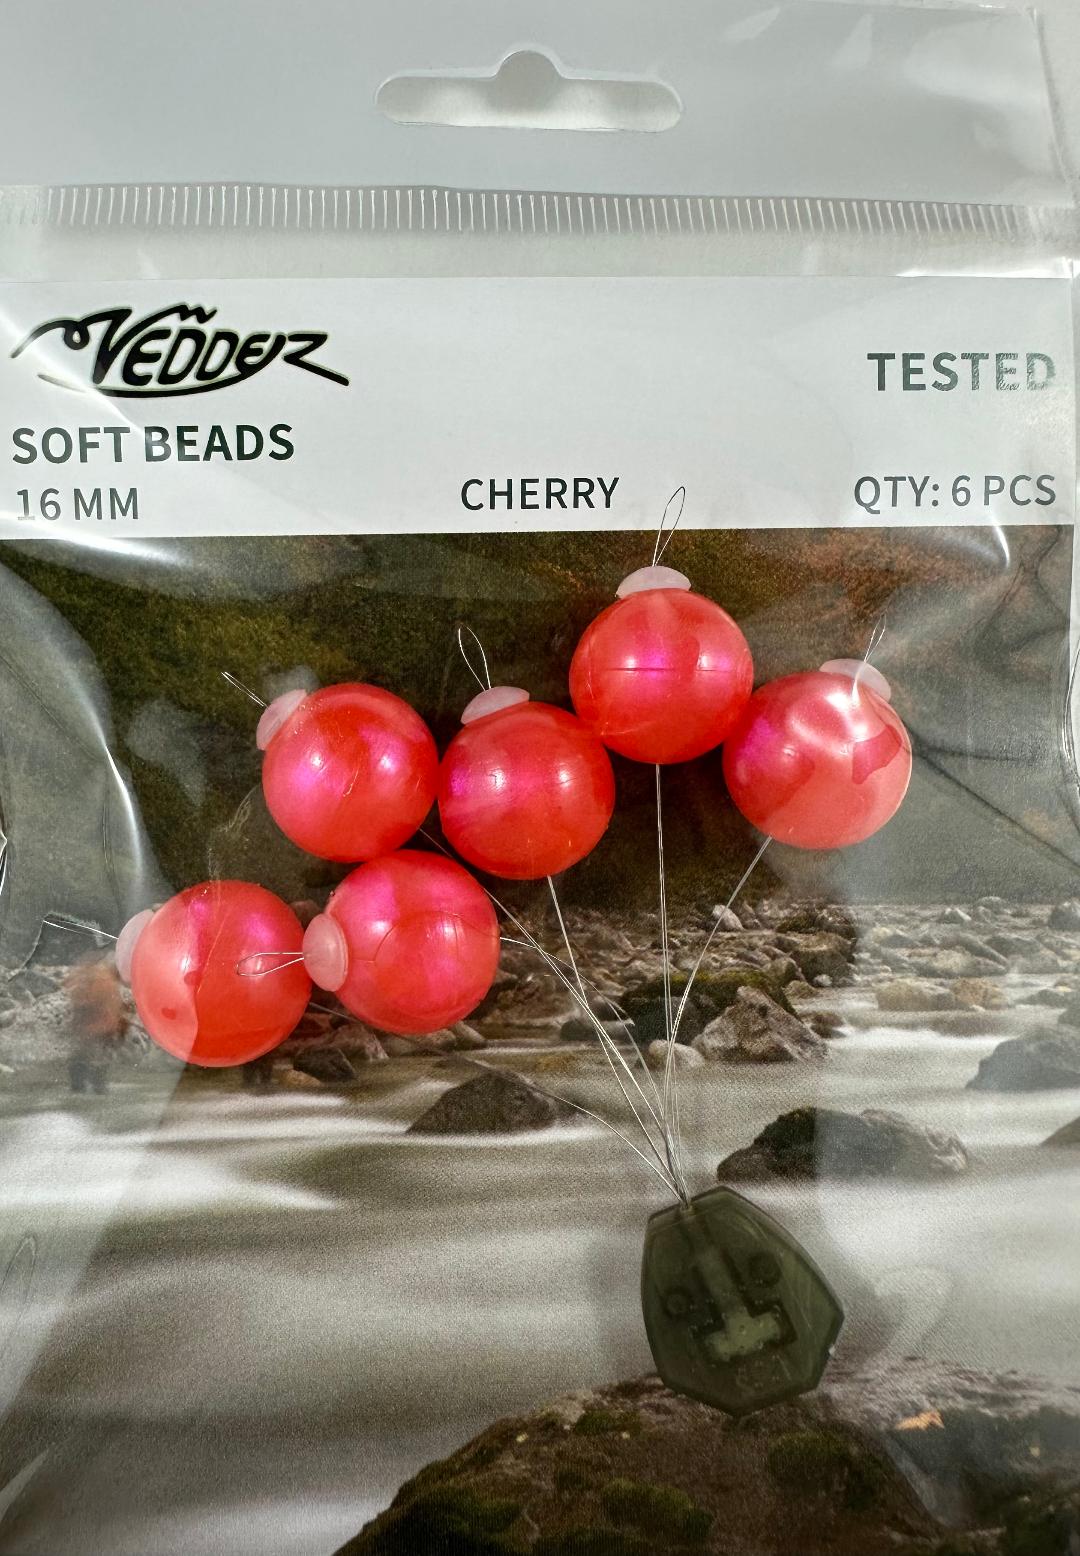 VSB-Cherry 16 Vedder 16 mm Cherry Soft Beads x 6 with Stoppers x 6